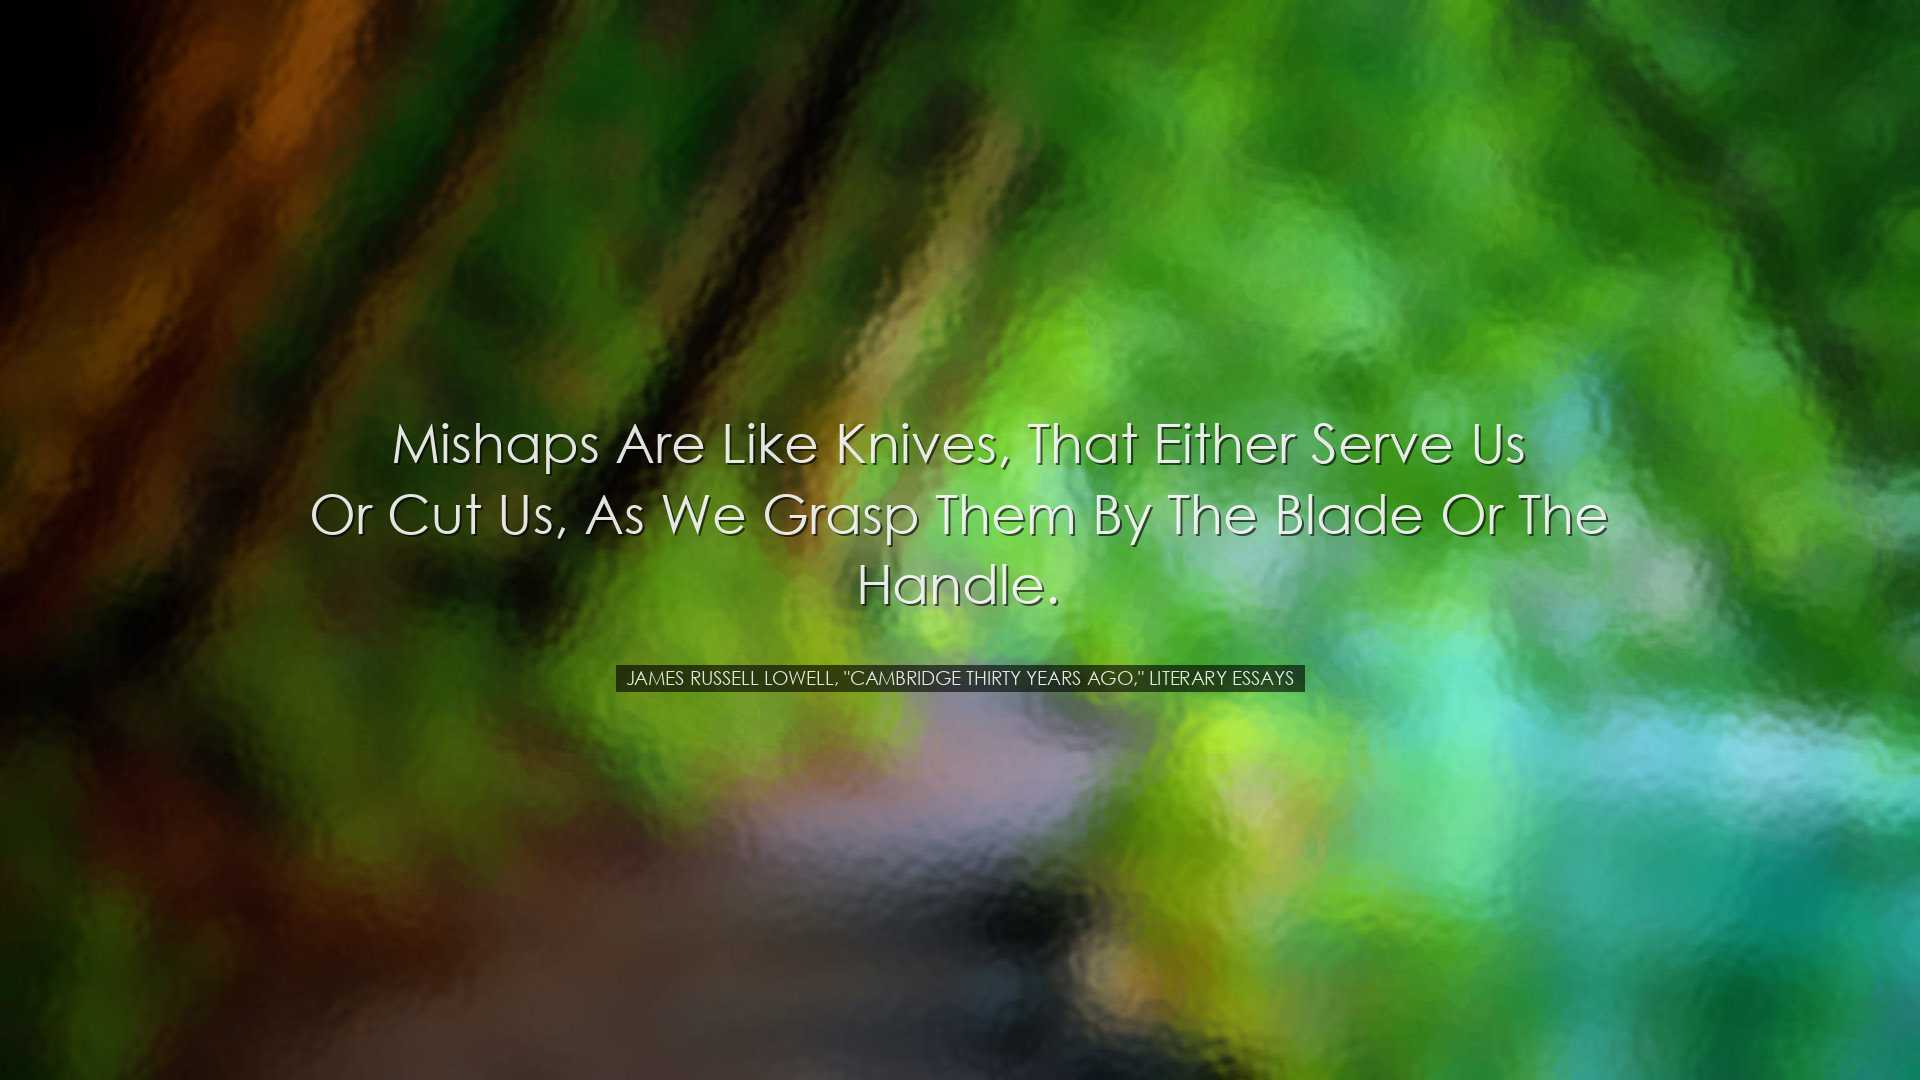 Mishaps are like knives, that either serve us or cut us, as we gra